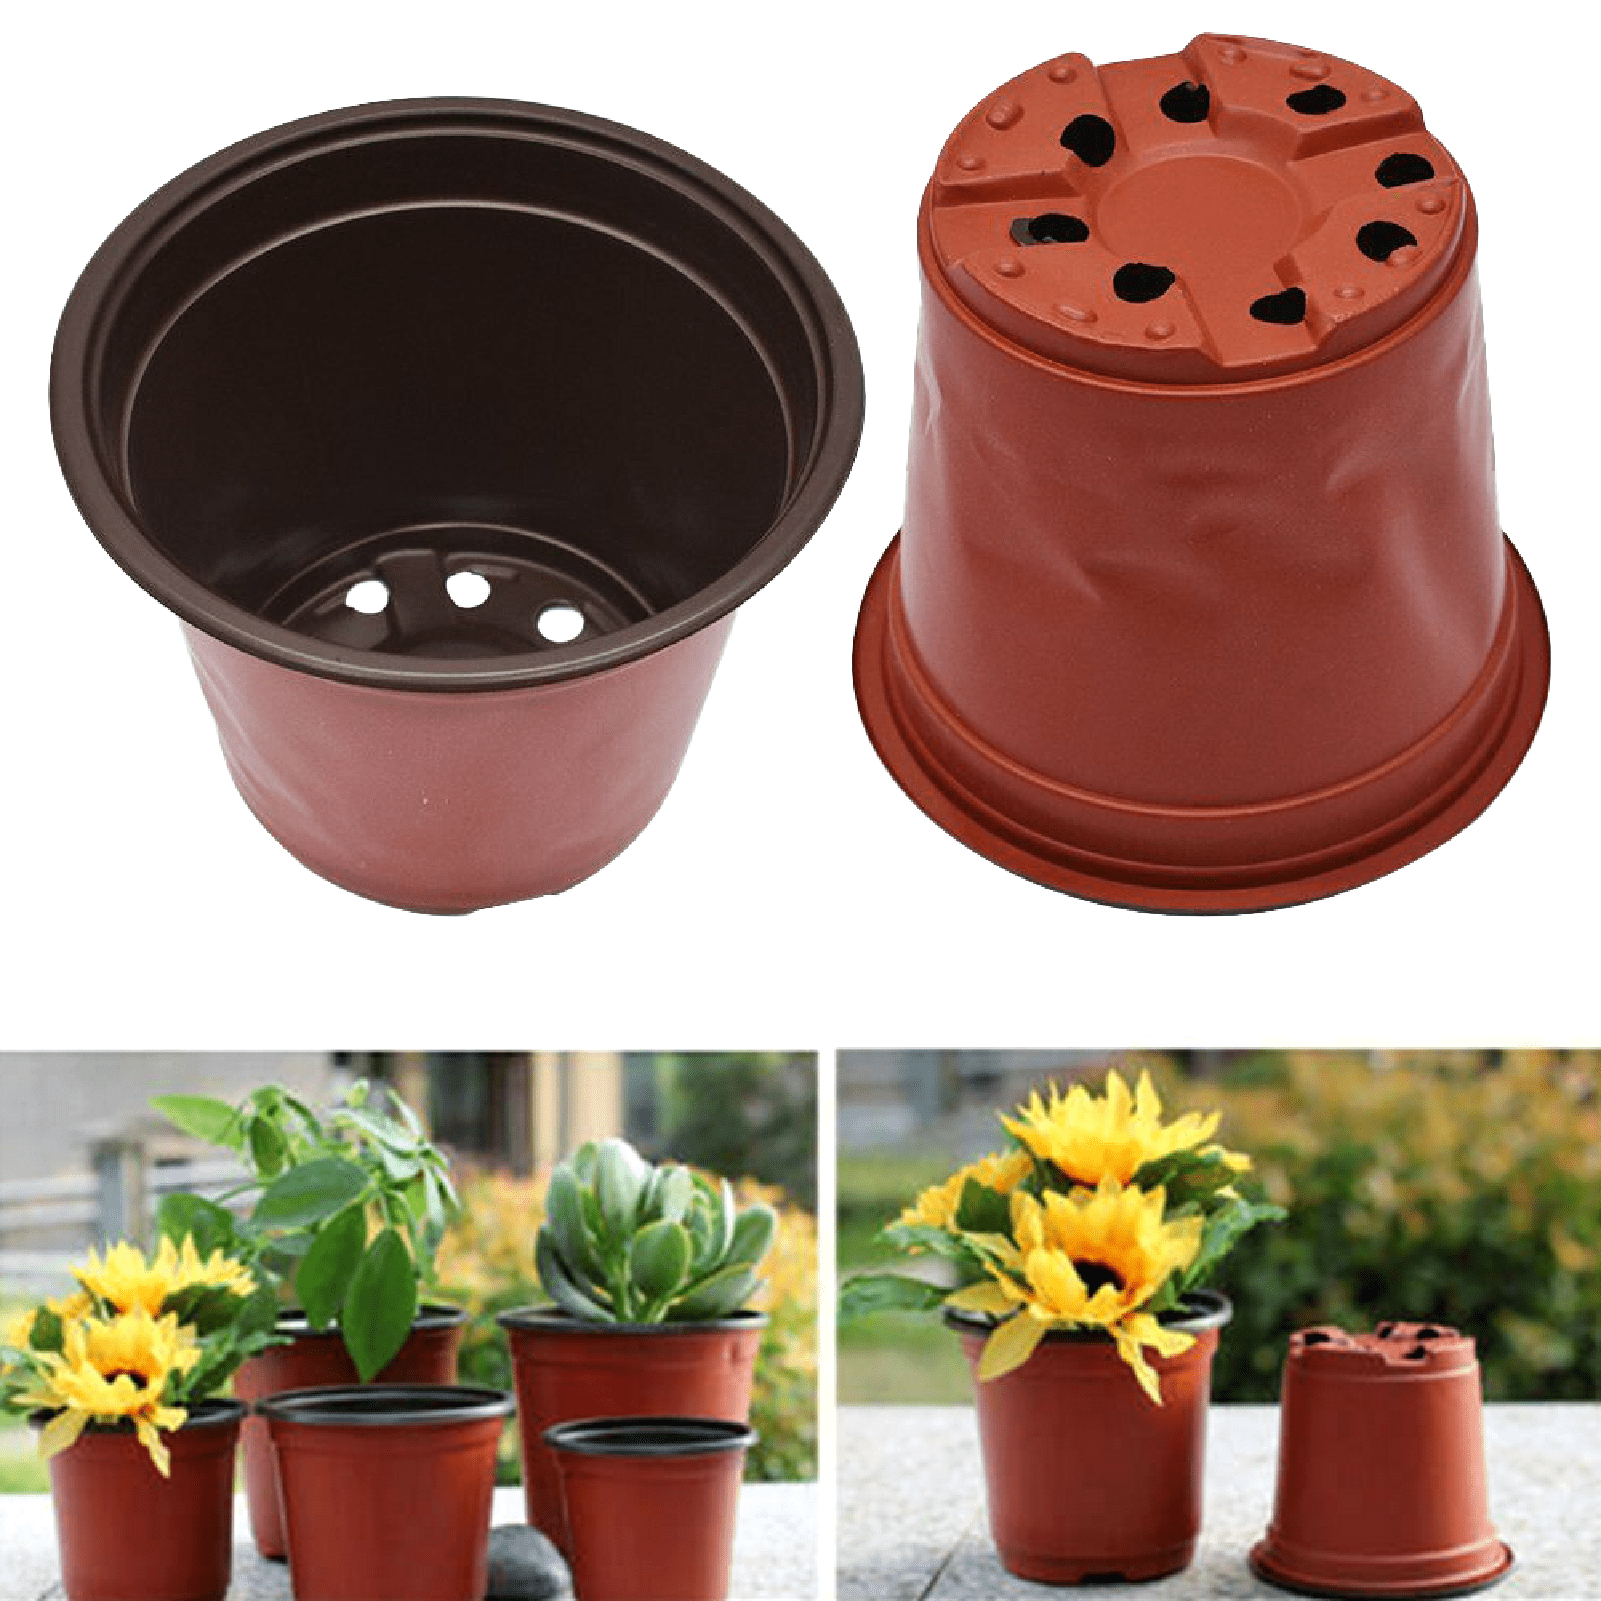 Details about   30 Pcs Plant Nursery Pots With Humidity Dome-Gardening Pots Small-Square Planti 